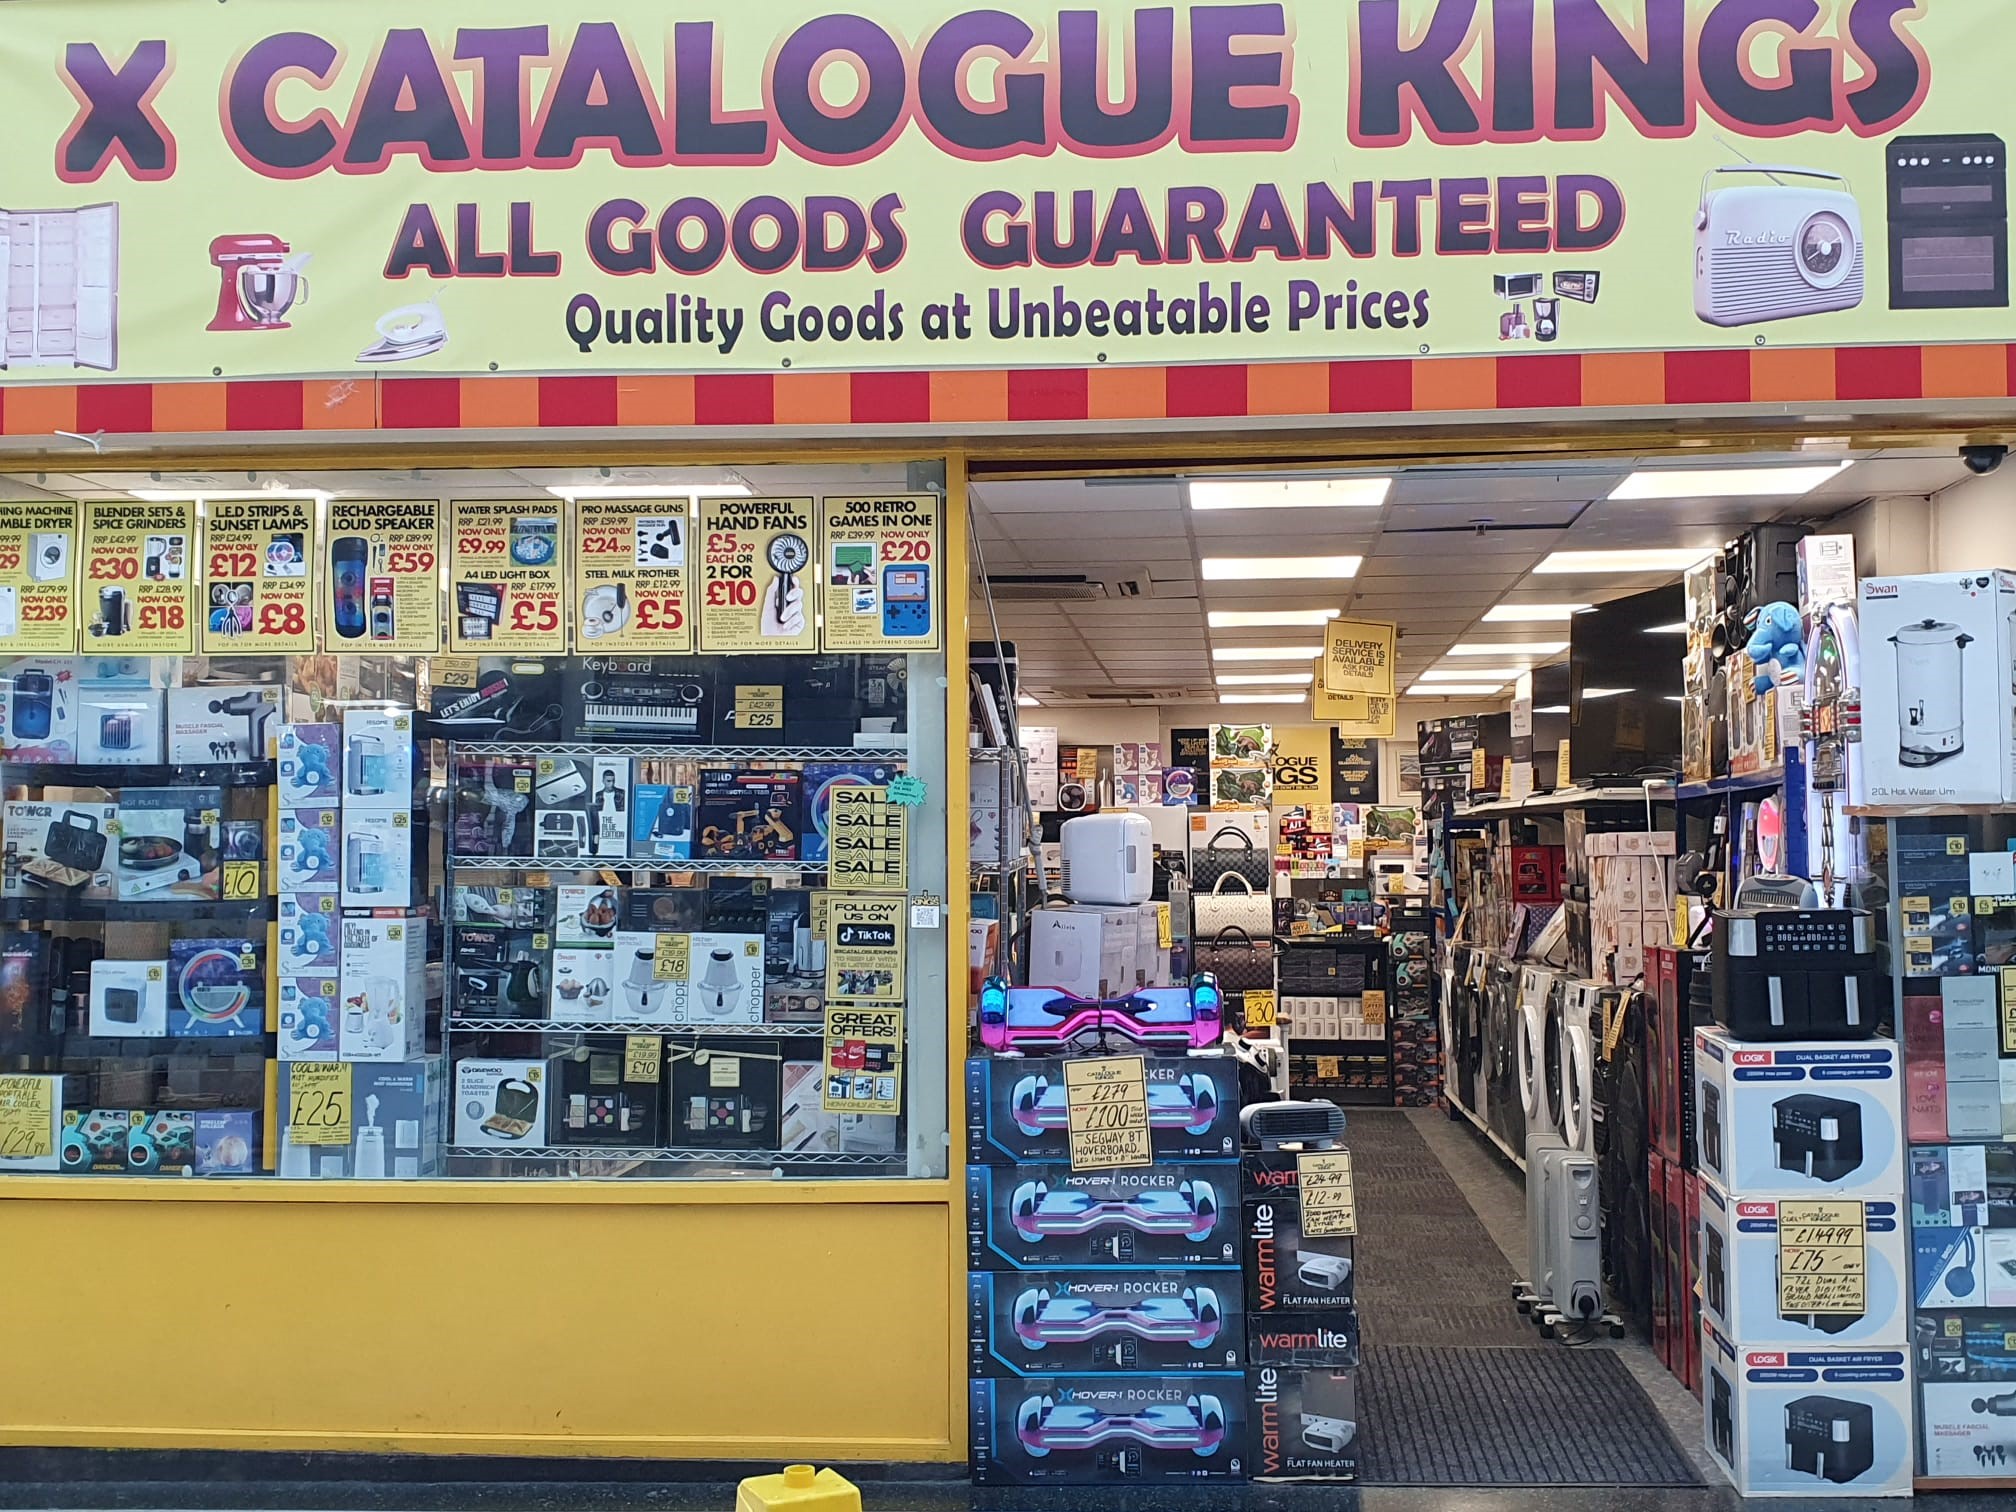 X Catalogue Kings fantastic offers